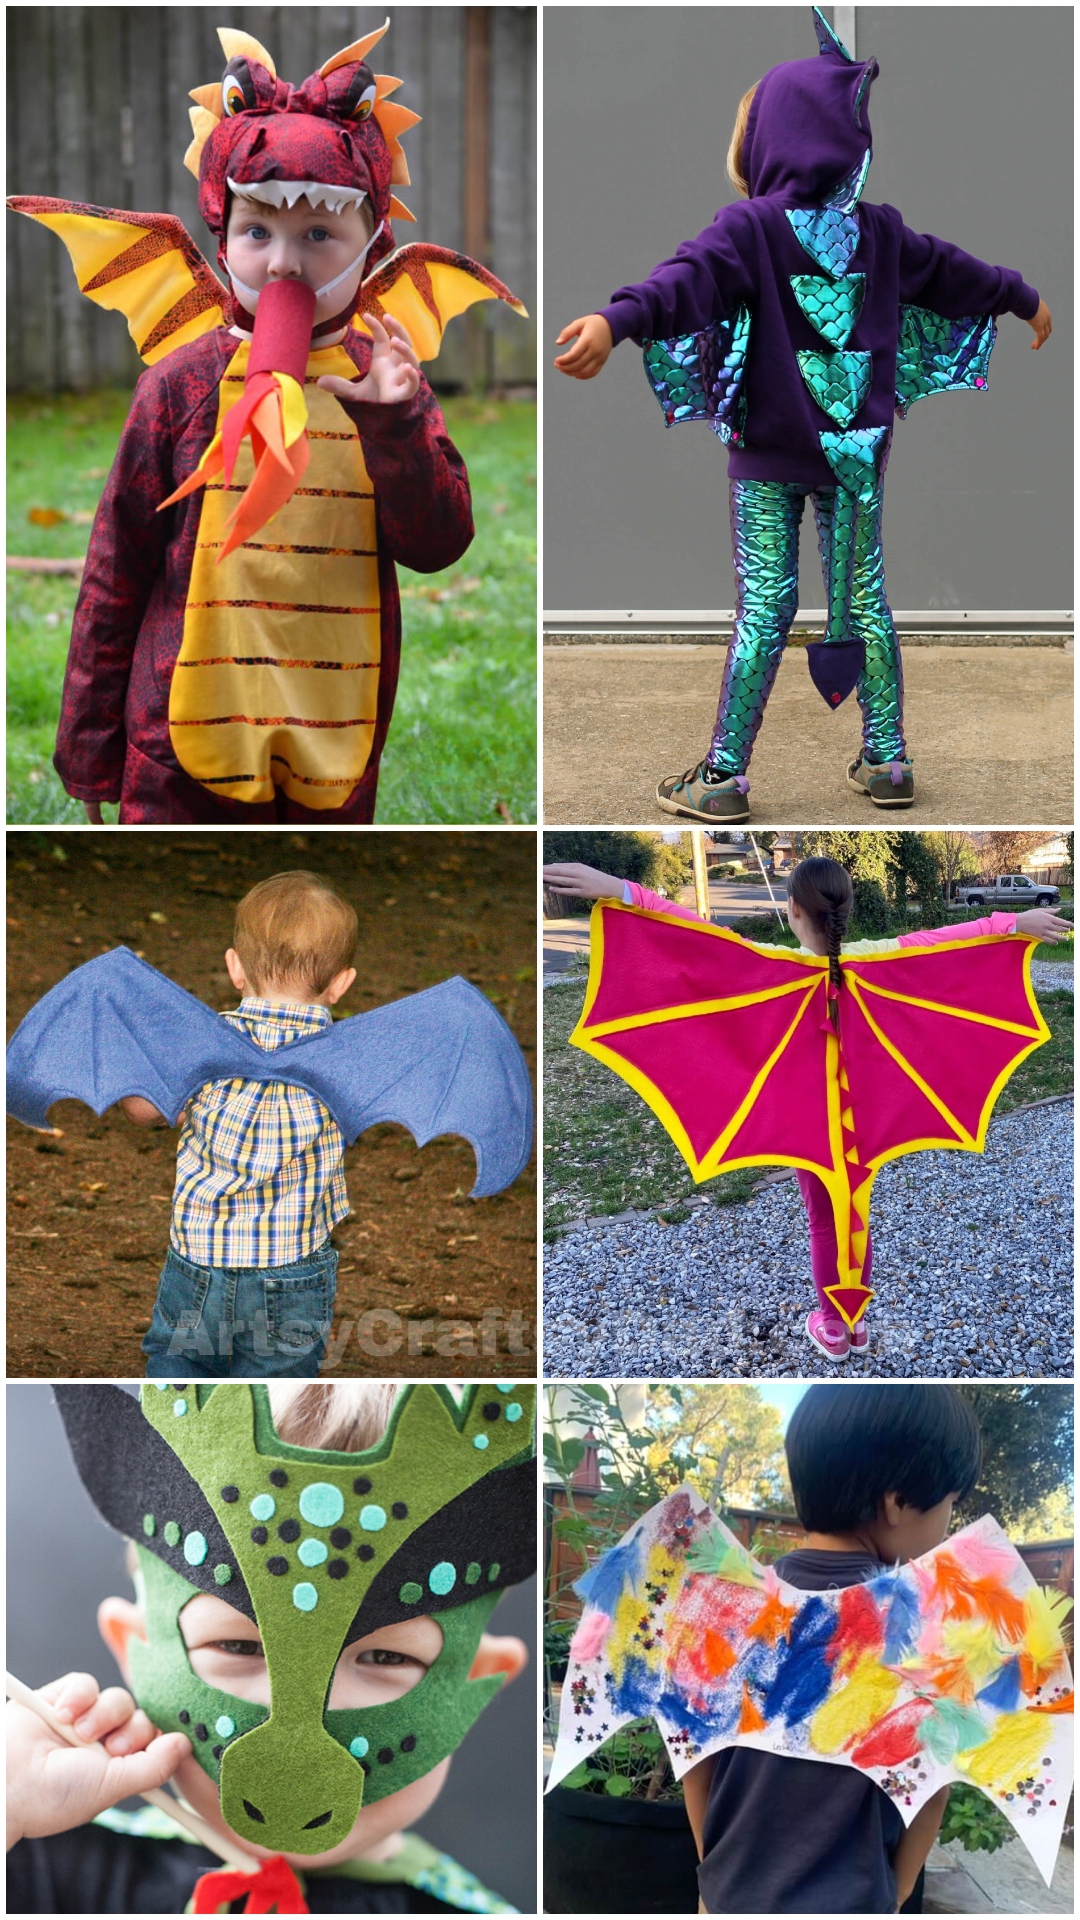  How to Make Dragon Costumes at Home